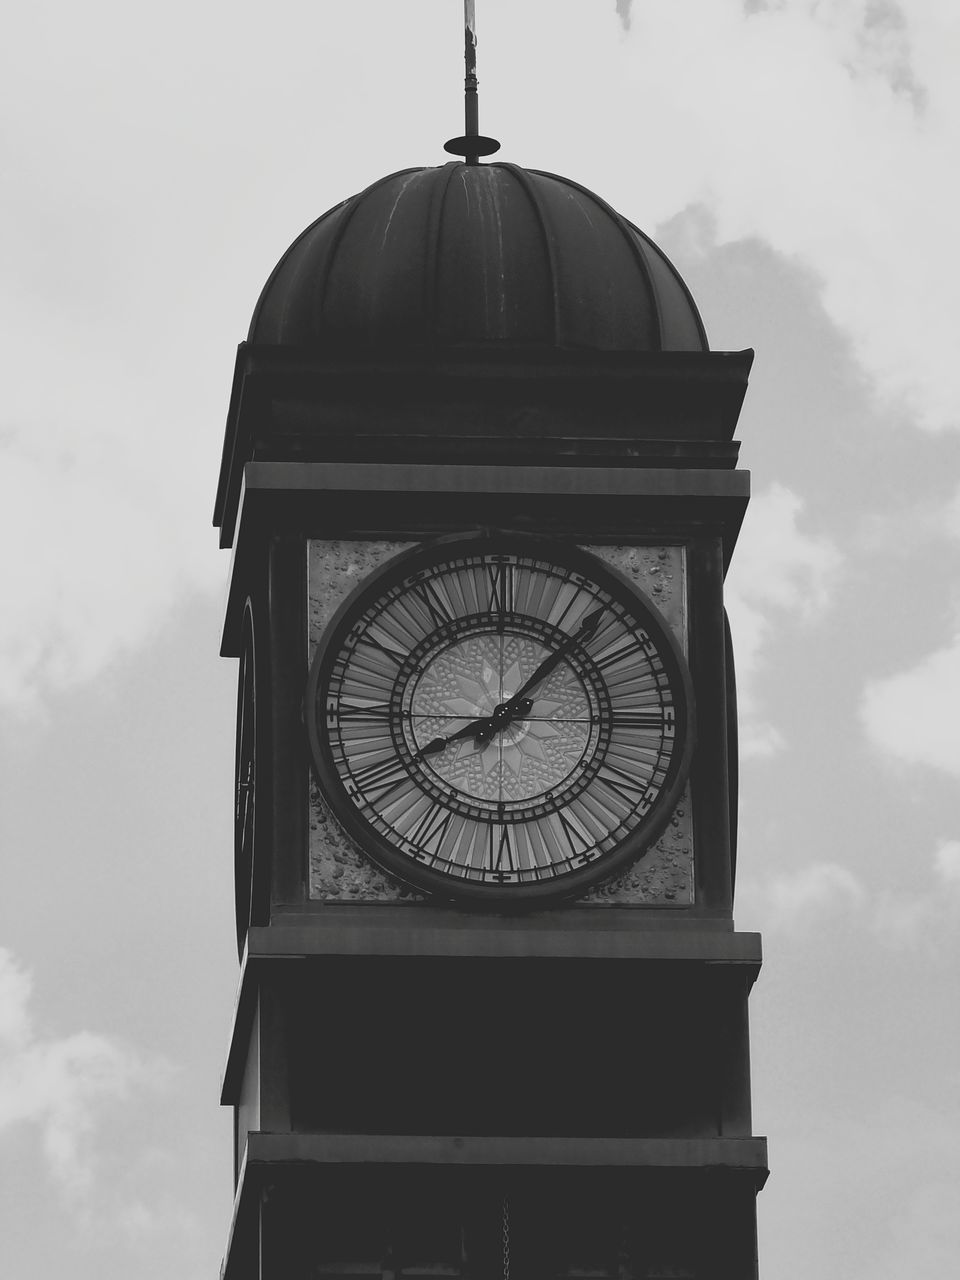 clock, architecture, built structure, building exterior, time, black and white, tower, sky, low angle view, clock tower, no people, cloud, clock face, monochrome, travel destinations, nature, building, day, monochrome photography, black, city, outdoors, white, dome, travel, history